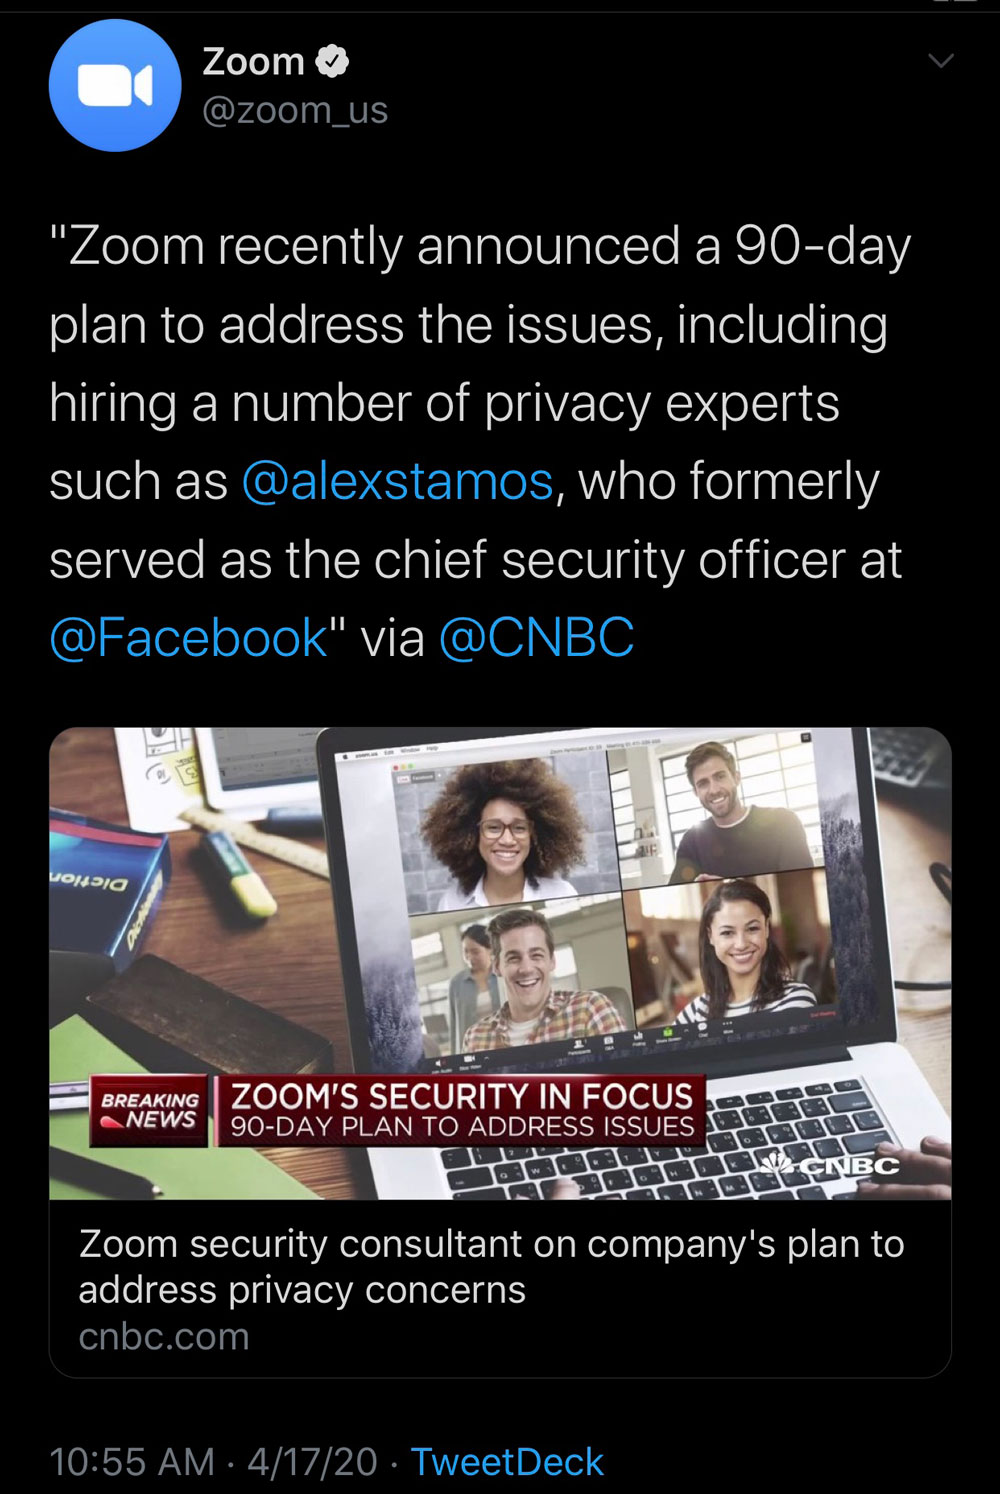 SCREENSHOT: Zoom US tweeted a link to CNBC which addresses Zooms 90 day plan to address privacy and security issues. Screenshot by The Signal reporter, Valery Rodriguez. Source: https://twitter.com/zoom_us/status/1251177349317570560